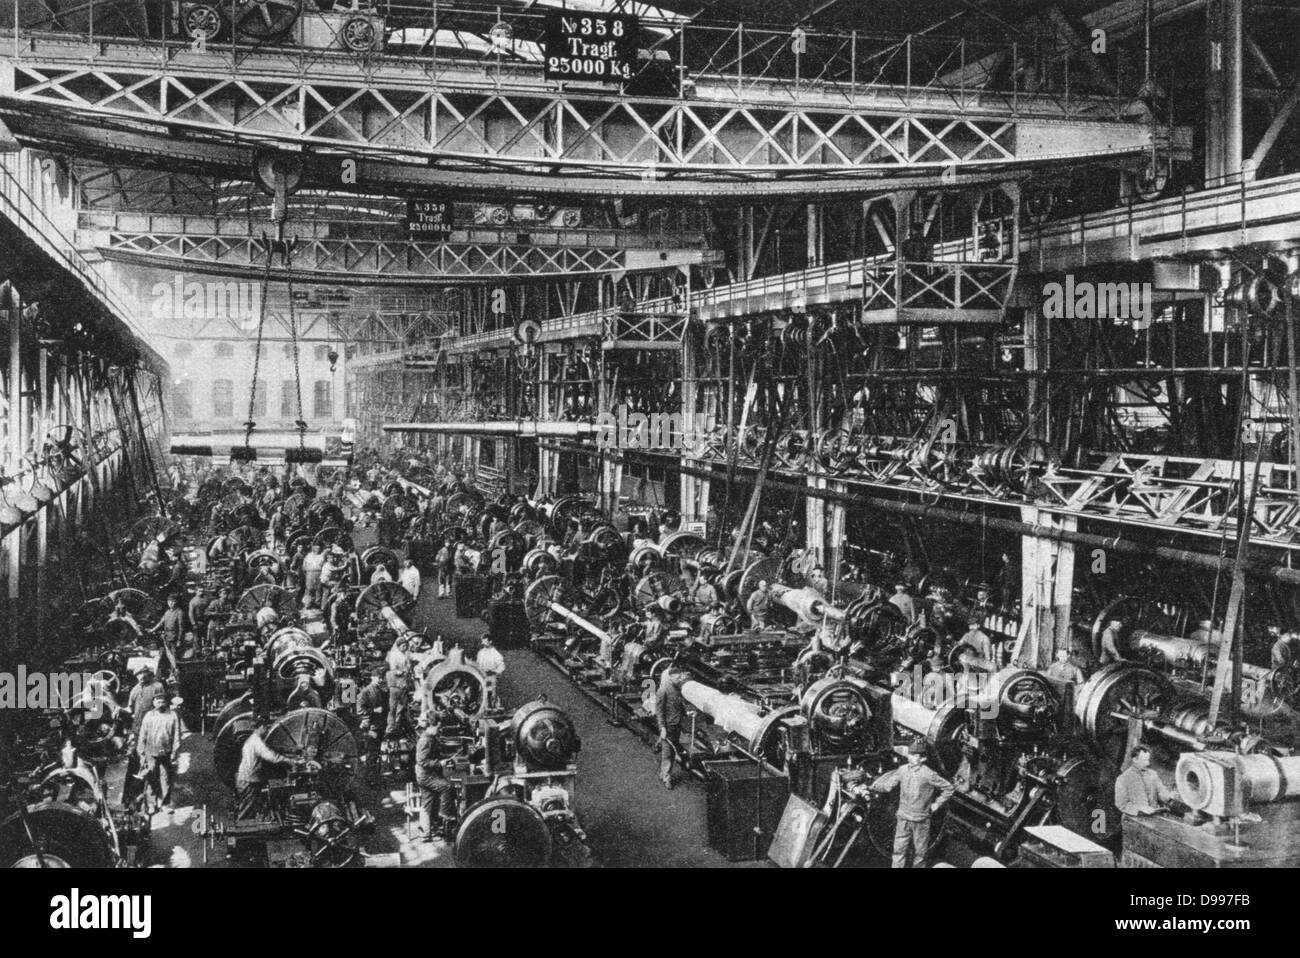 World War I 1914-1918:  Cannon workshop, Krupp works, Essen, Ruhr, Germany, 1917.  Machine shop with overhead cranes and power transmission by belt and shafting. Factory, Tools, Armaments, Weapon, Gun Stock Photo